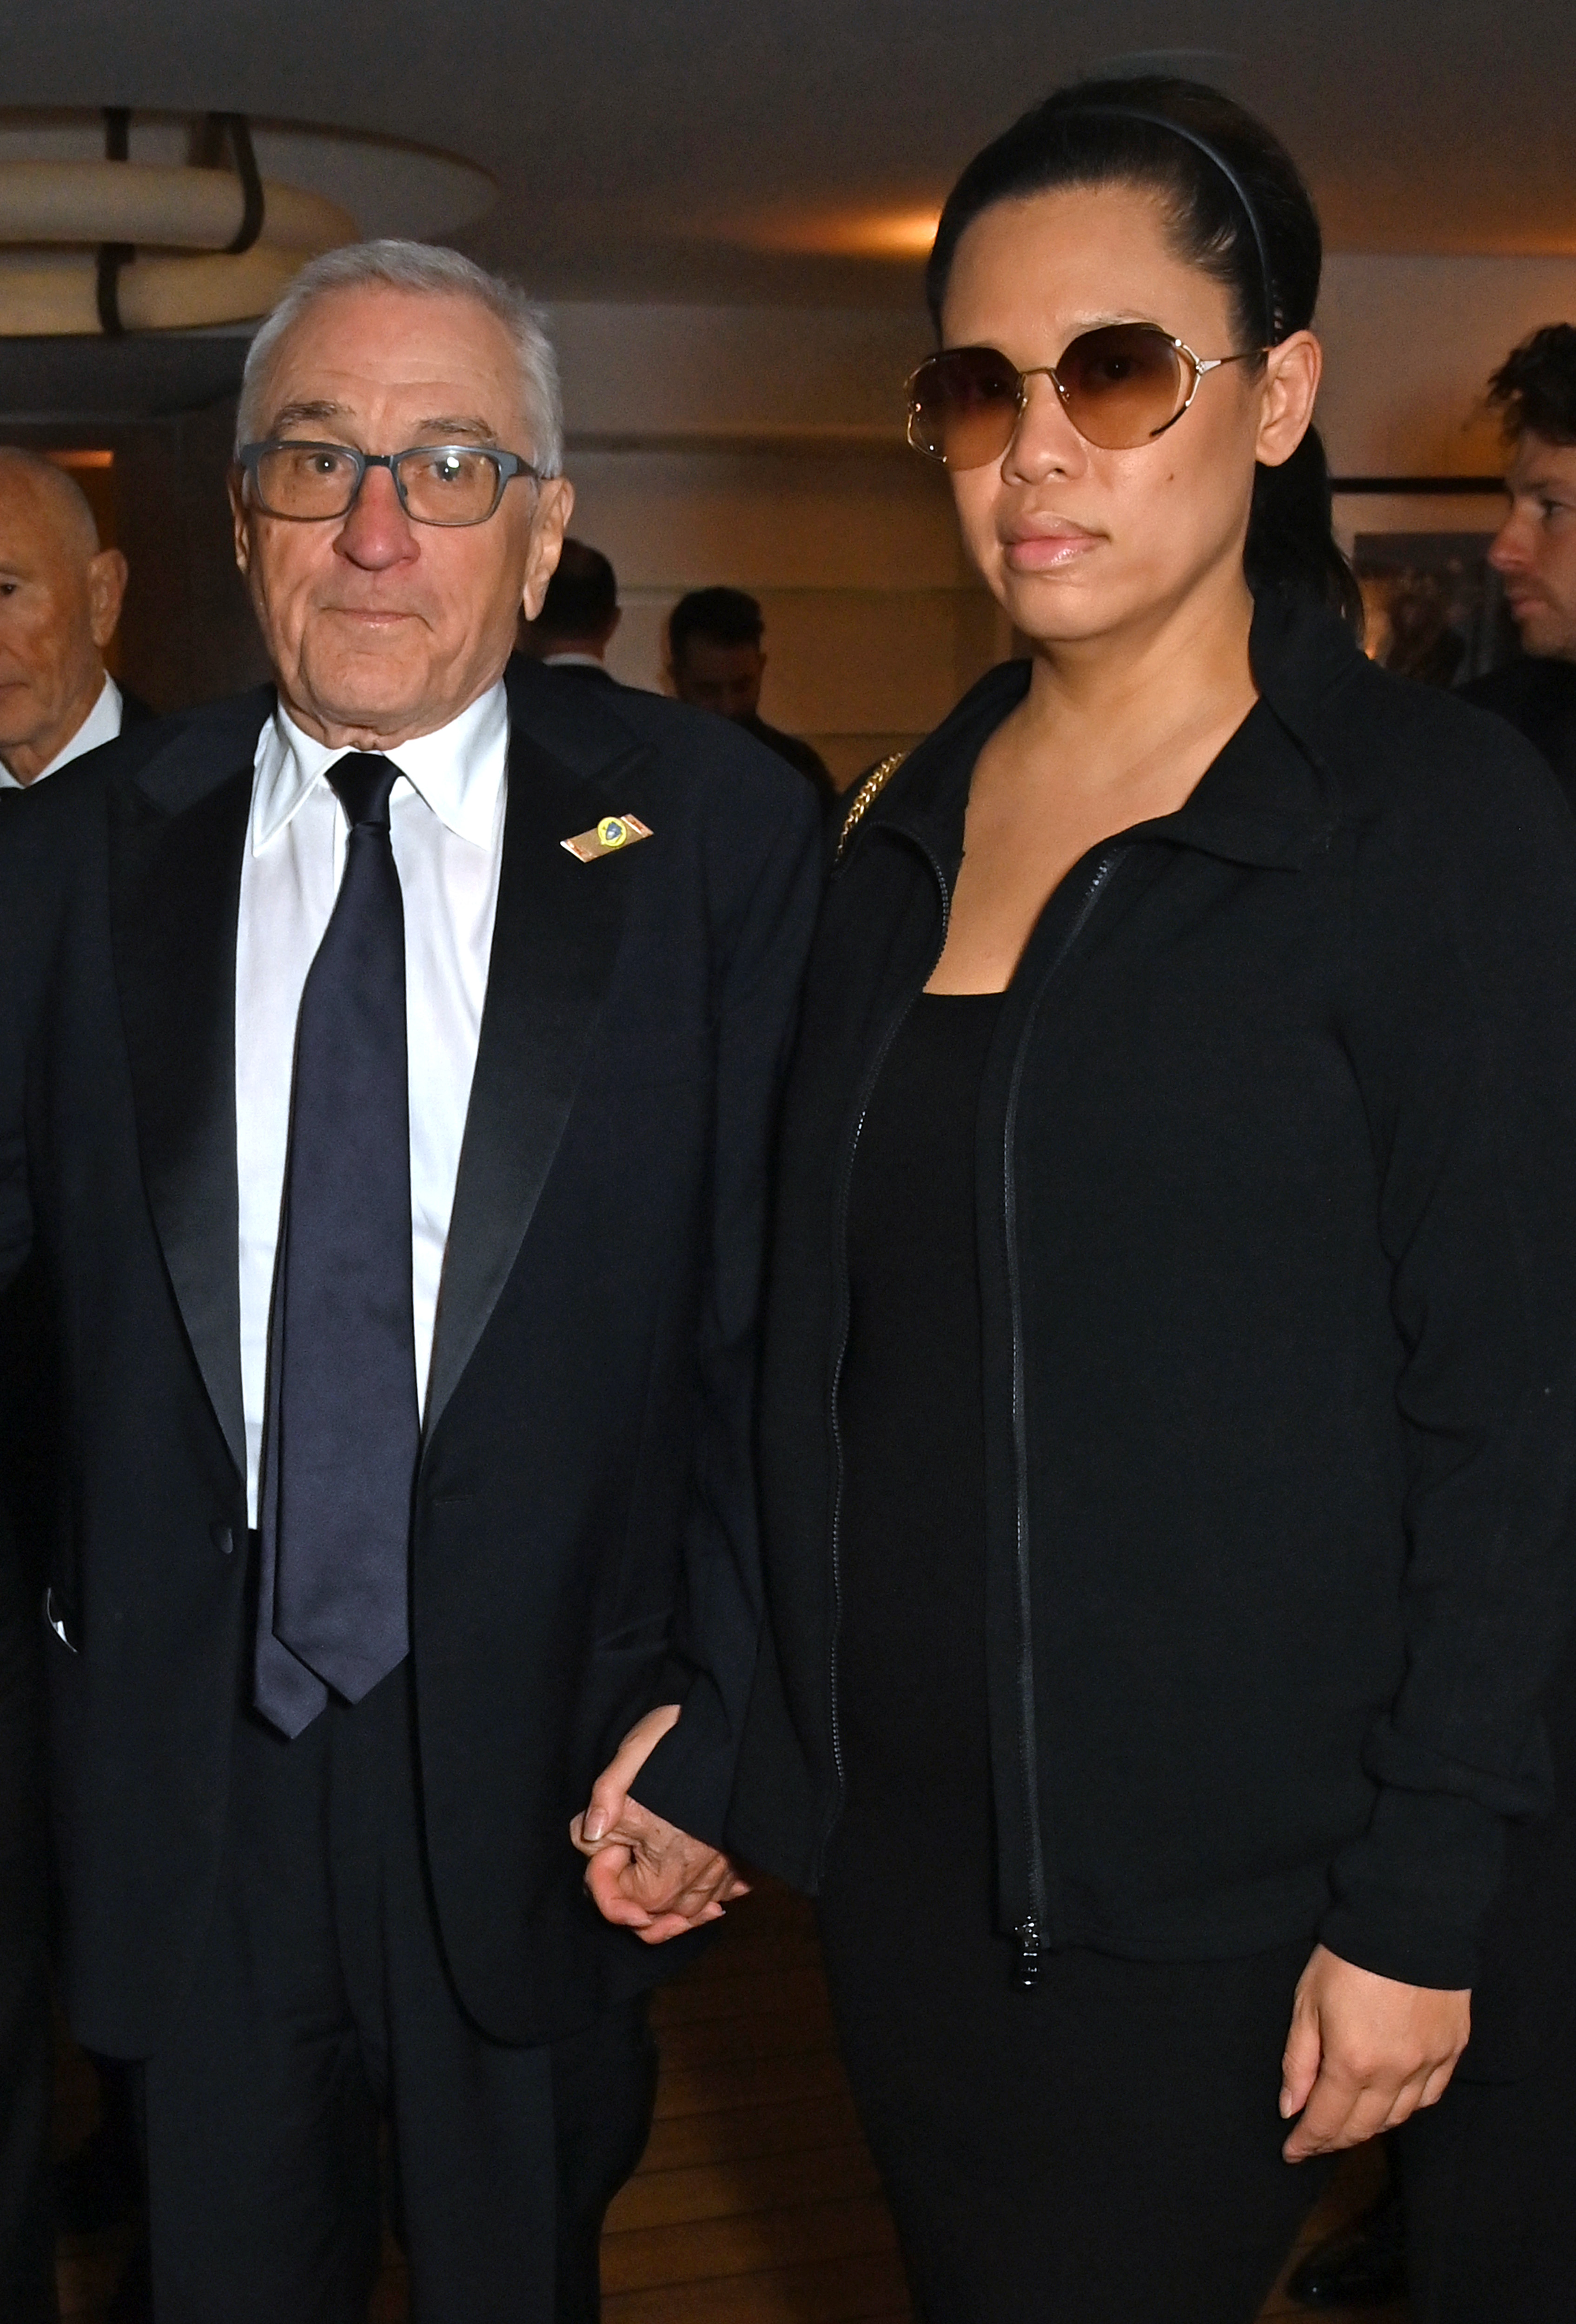 Robert De Niro and Tiffany Chen attend the Vanity Fair x Prada Party during the 2023 Cannes Film Festival at Hotel du Cap-Eden-Roc on May 20, 2023, in Cap d'Antibes, France. | Source: Getty Images